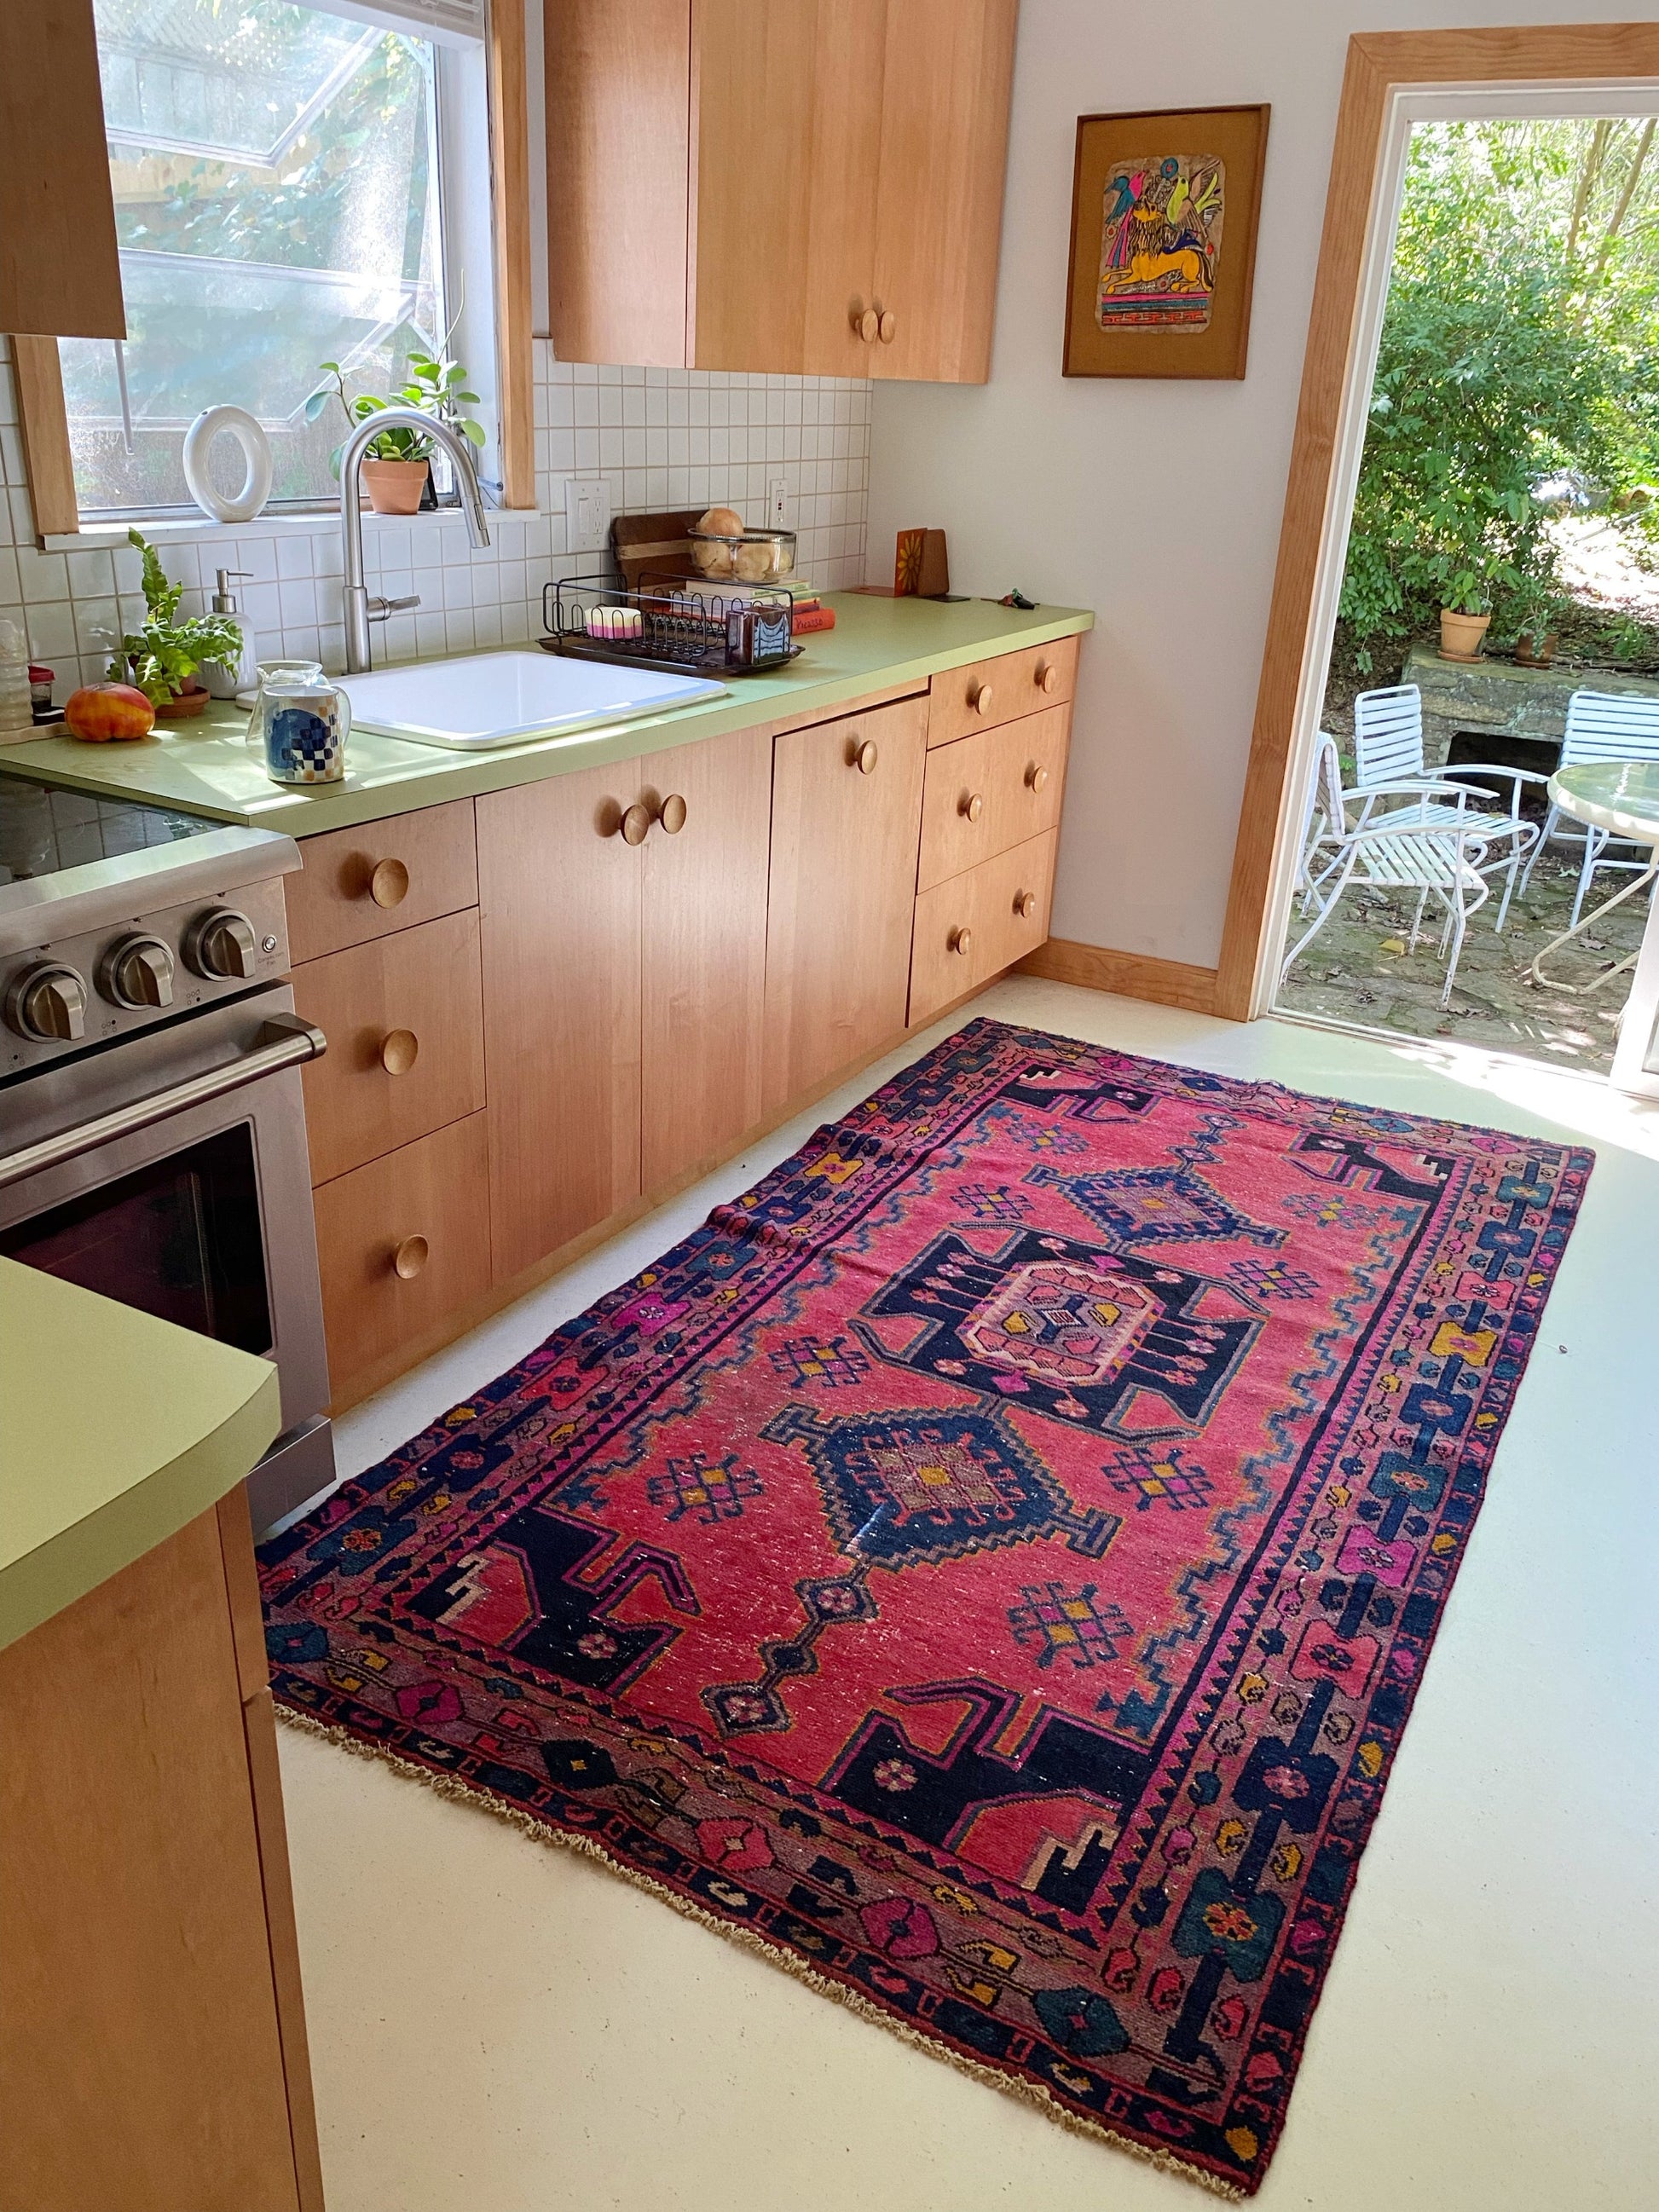 Tamarind Rug makes a kitchen pop with color